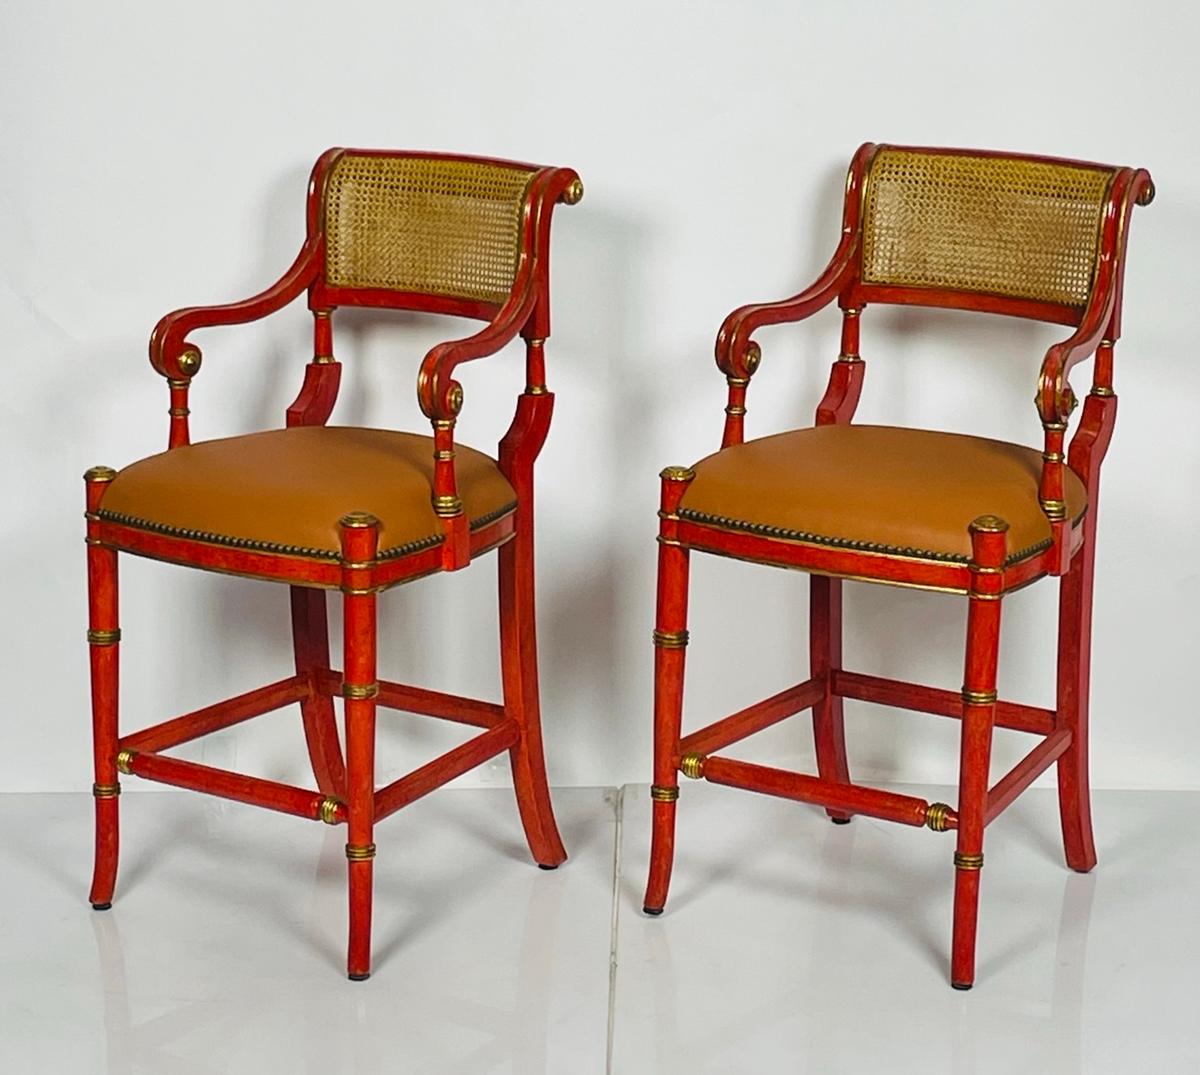 Regency Style Counter Stools With Gold Gilt, Canning & Leather Seats In Good Condition For Sale In Los Angeles, CA